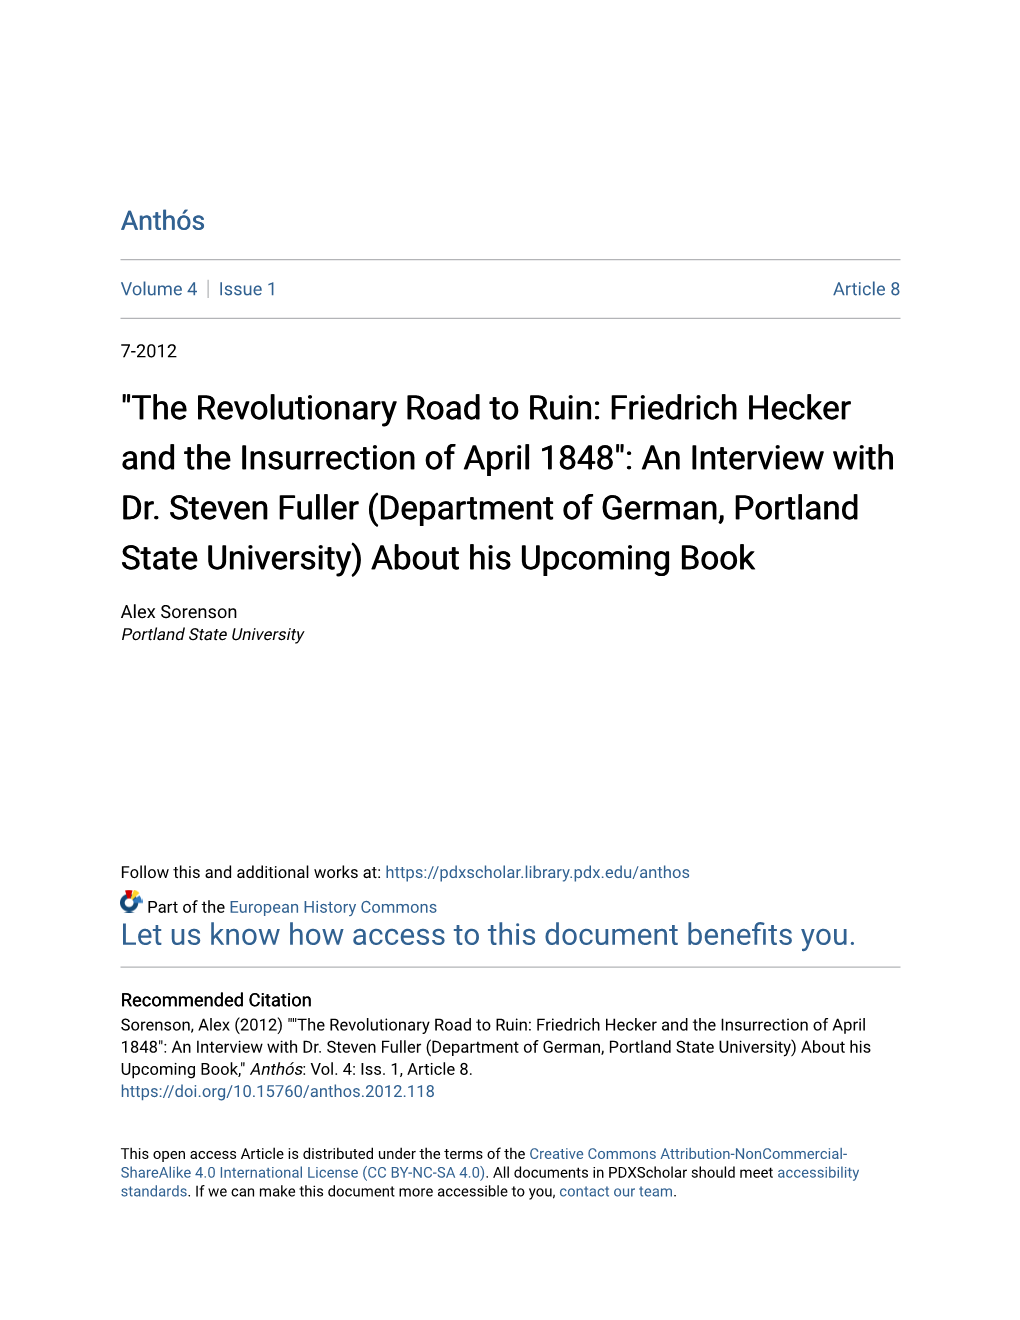 "The Revolutionary Road to Ruin: Friedrich Hecker and the Insurrection of April 1848": an Interview with Dr